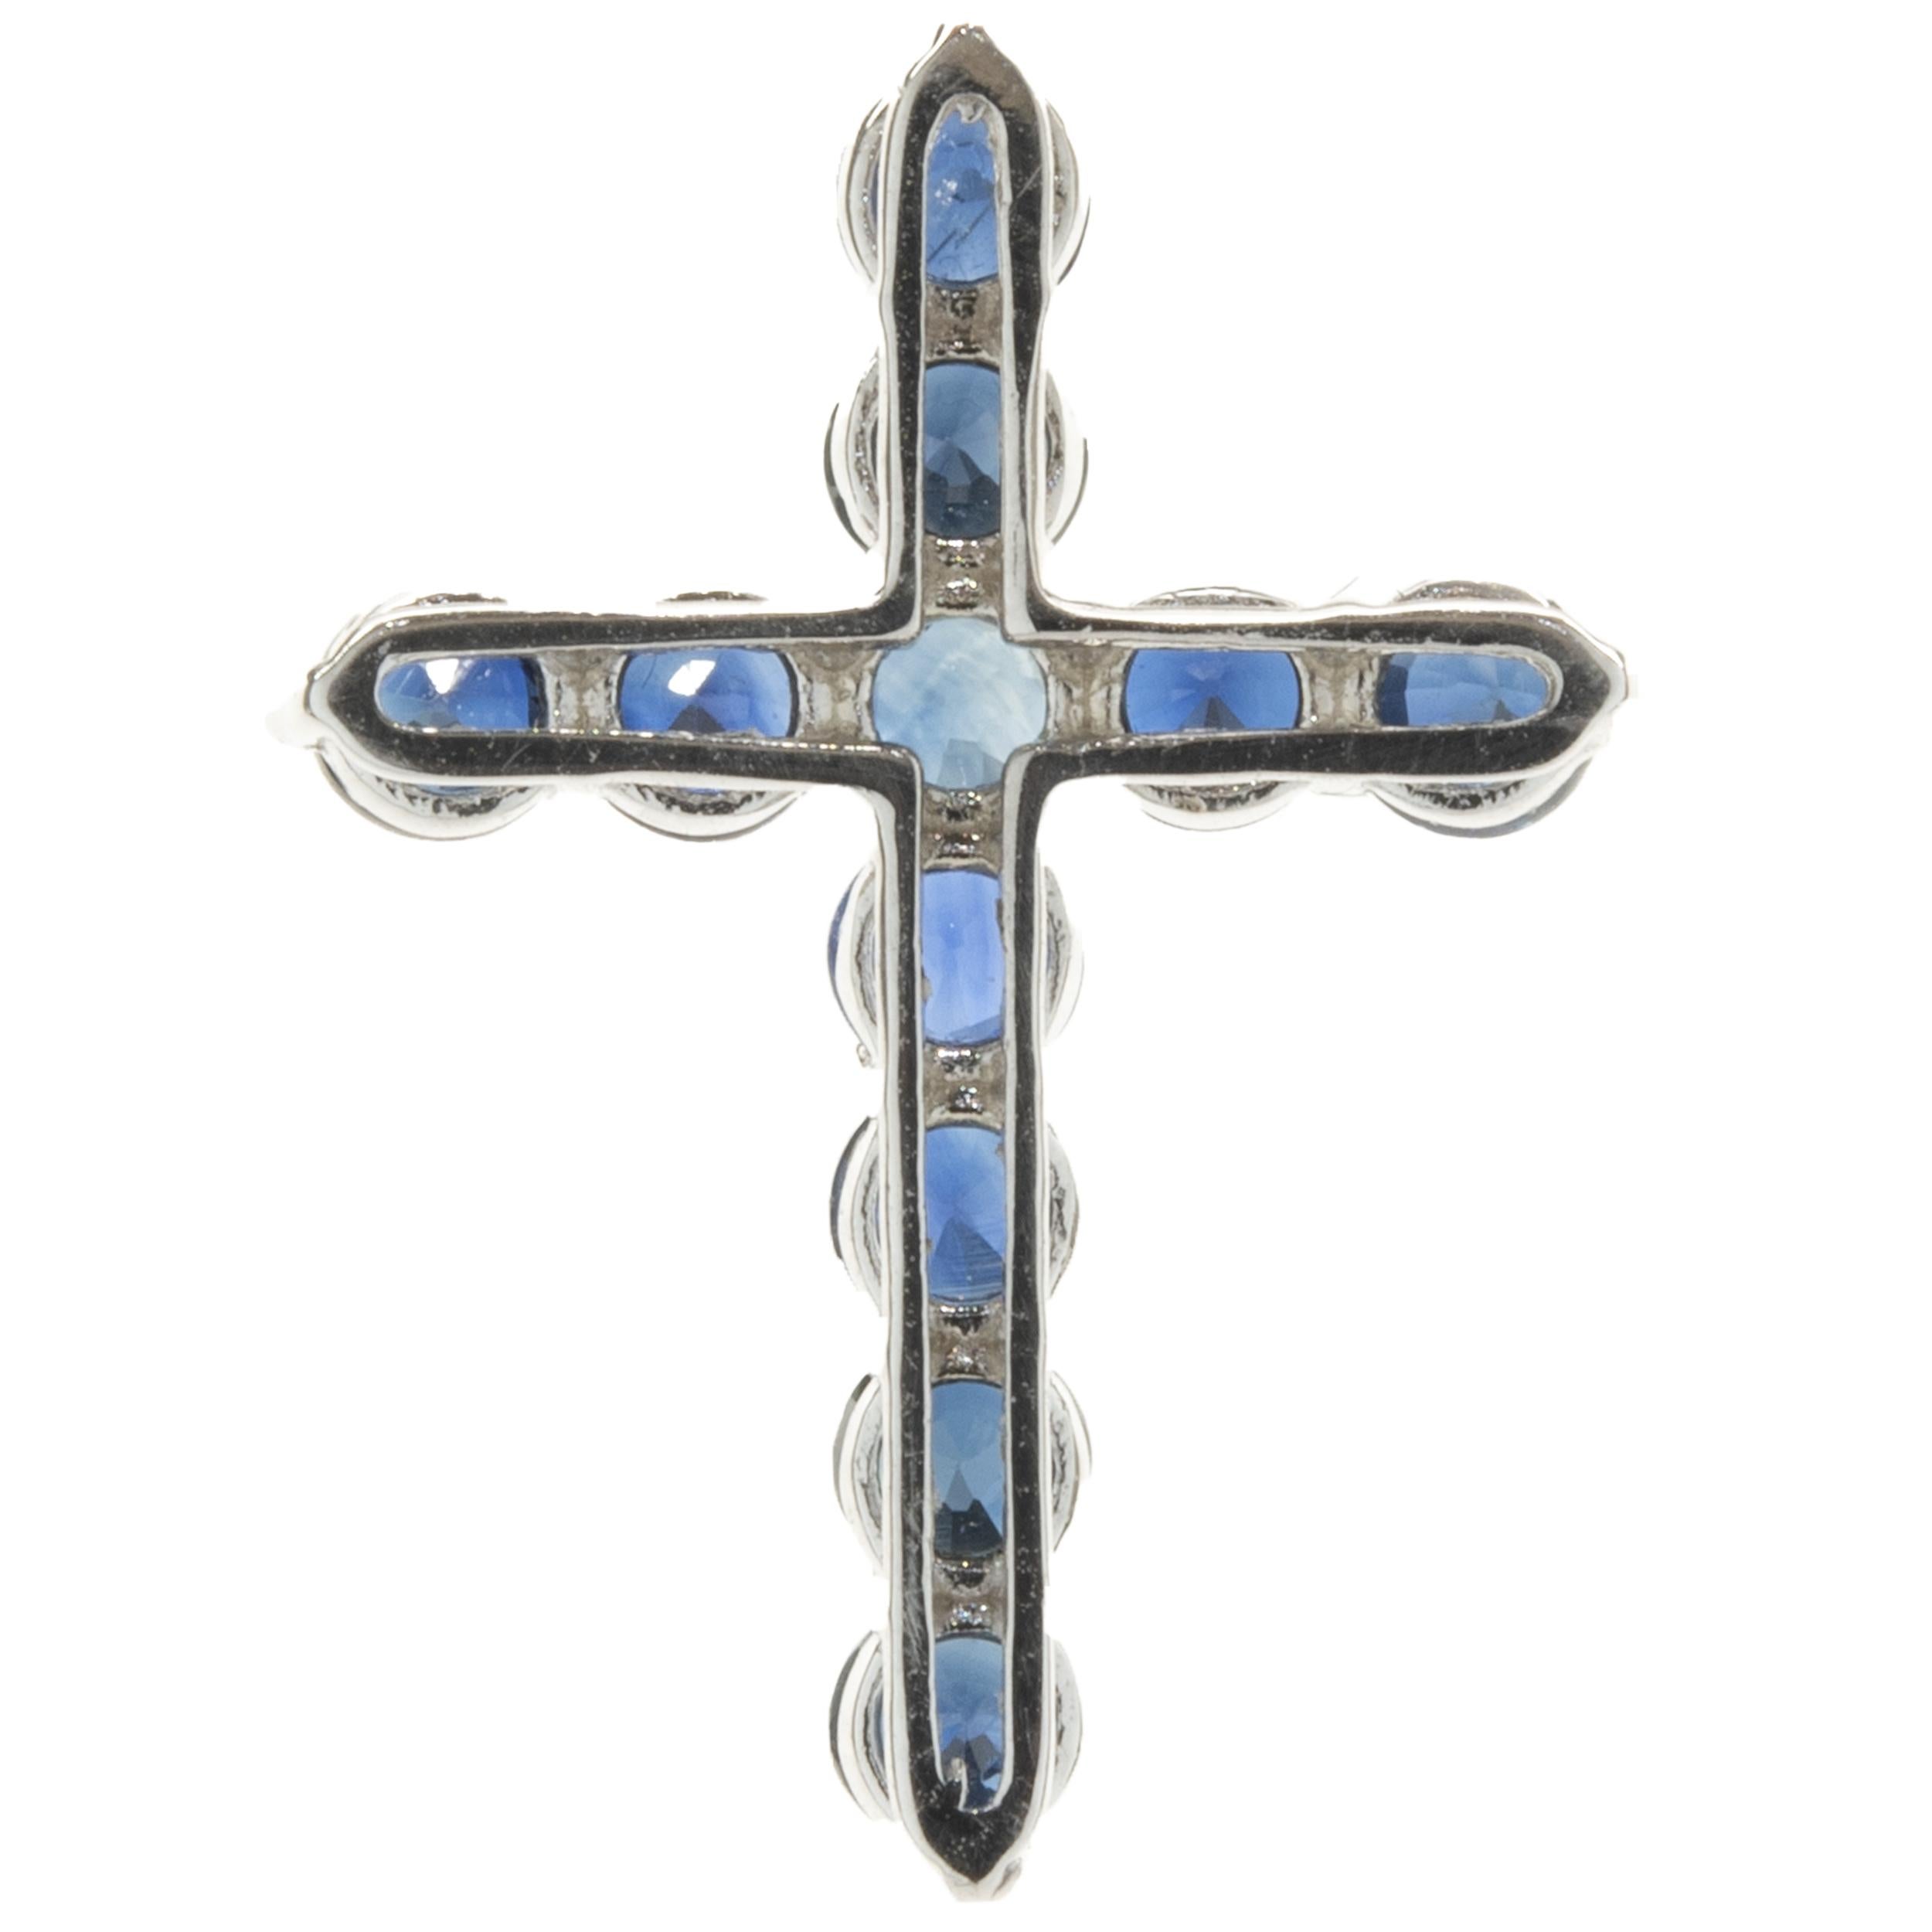 Designer: custom
Material: 14K white gold
Blue Sapphire: 11 round cut = 1.25cttw
Dimensions: cross measures 22.7 x 16.25mm
Weight: 1.25 grams
